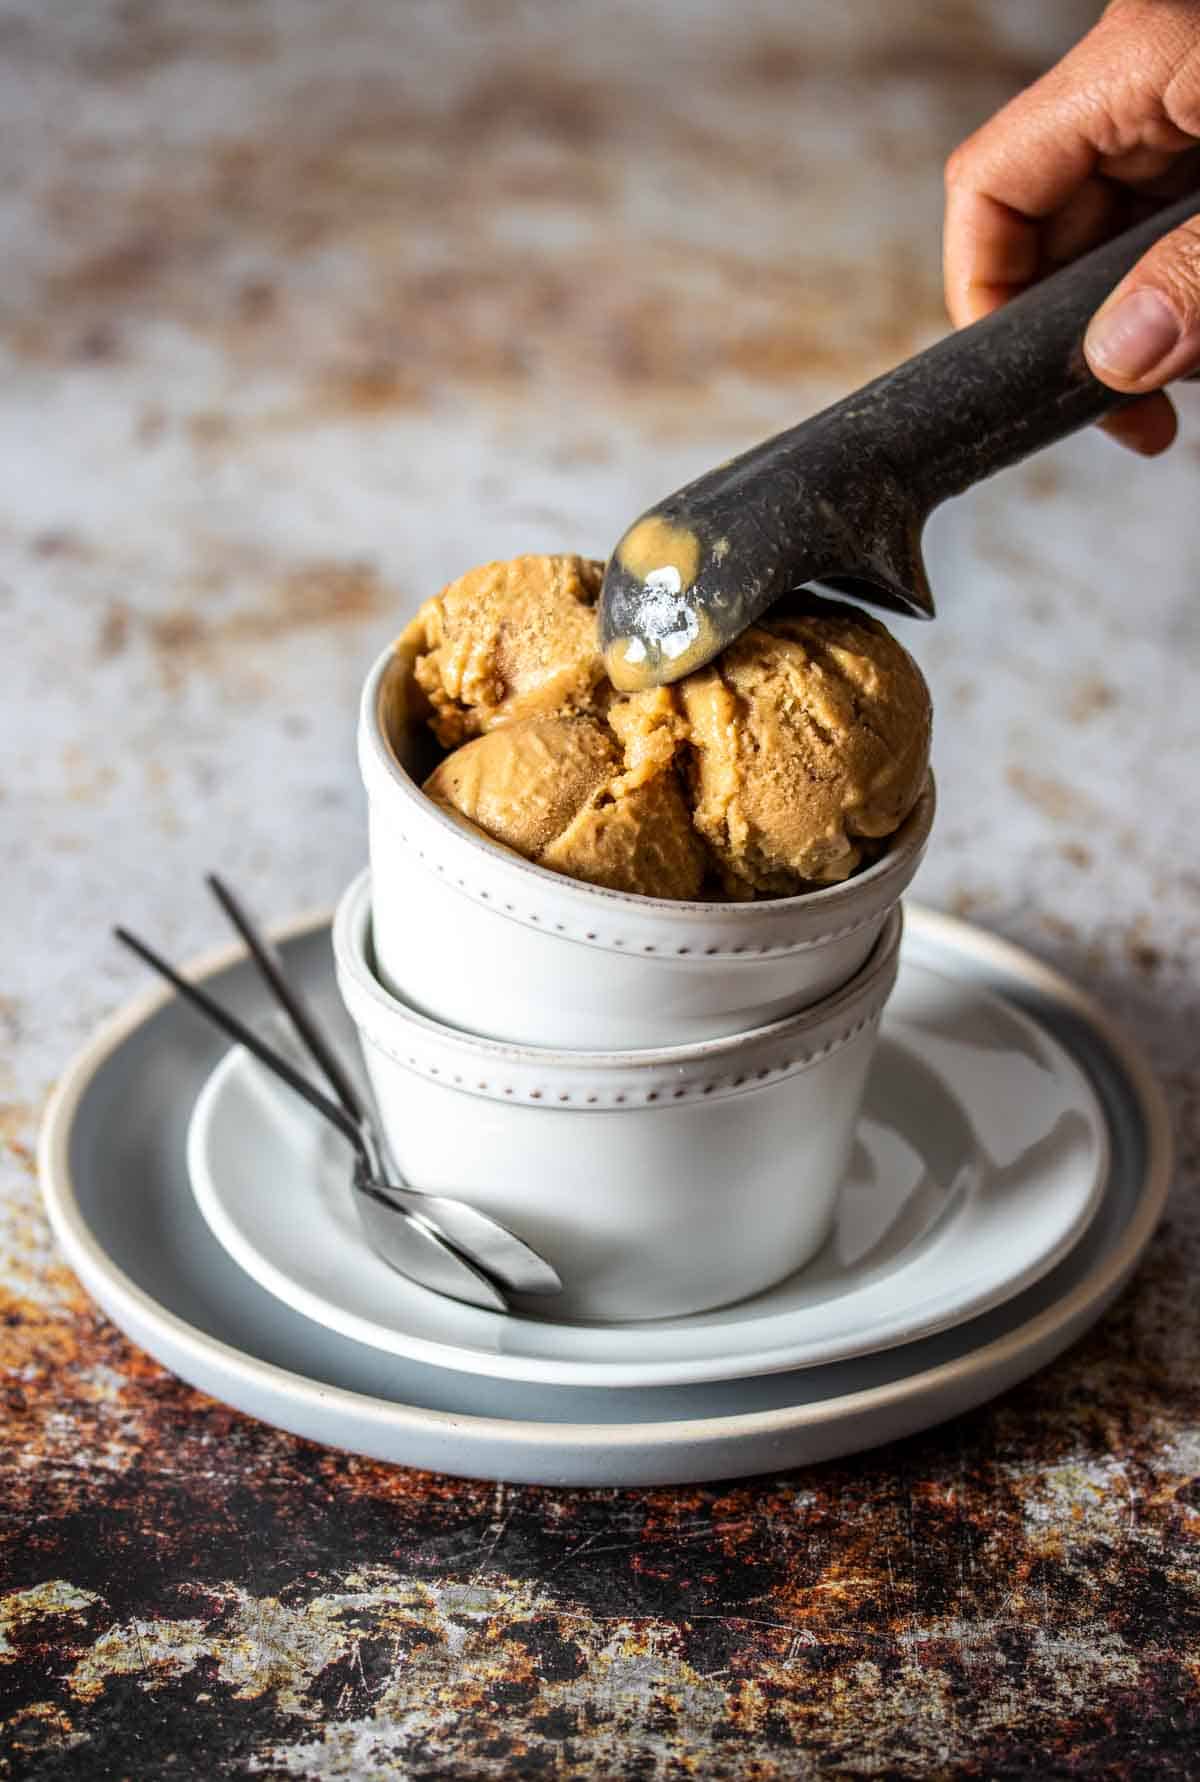 An ice cream scooper putting peanut butter ice cream in a white bowl stacked on another bowl.